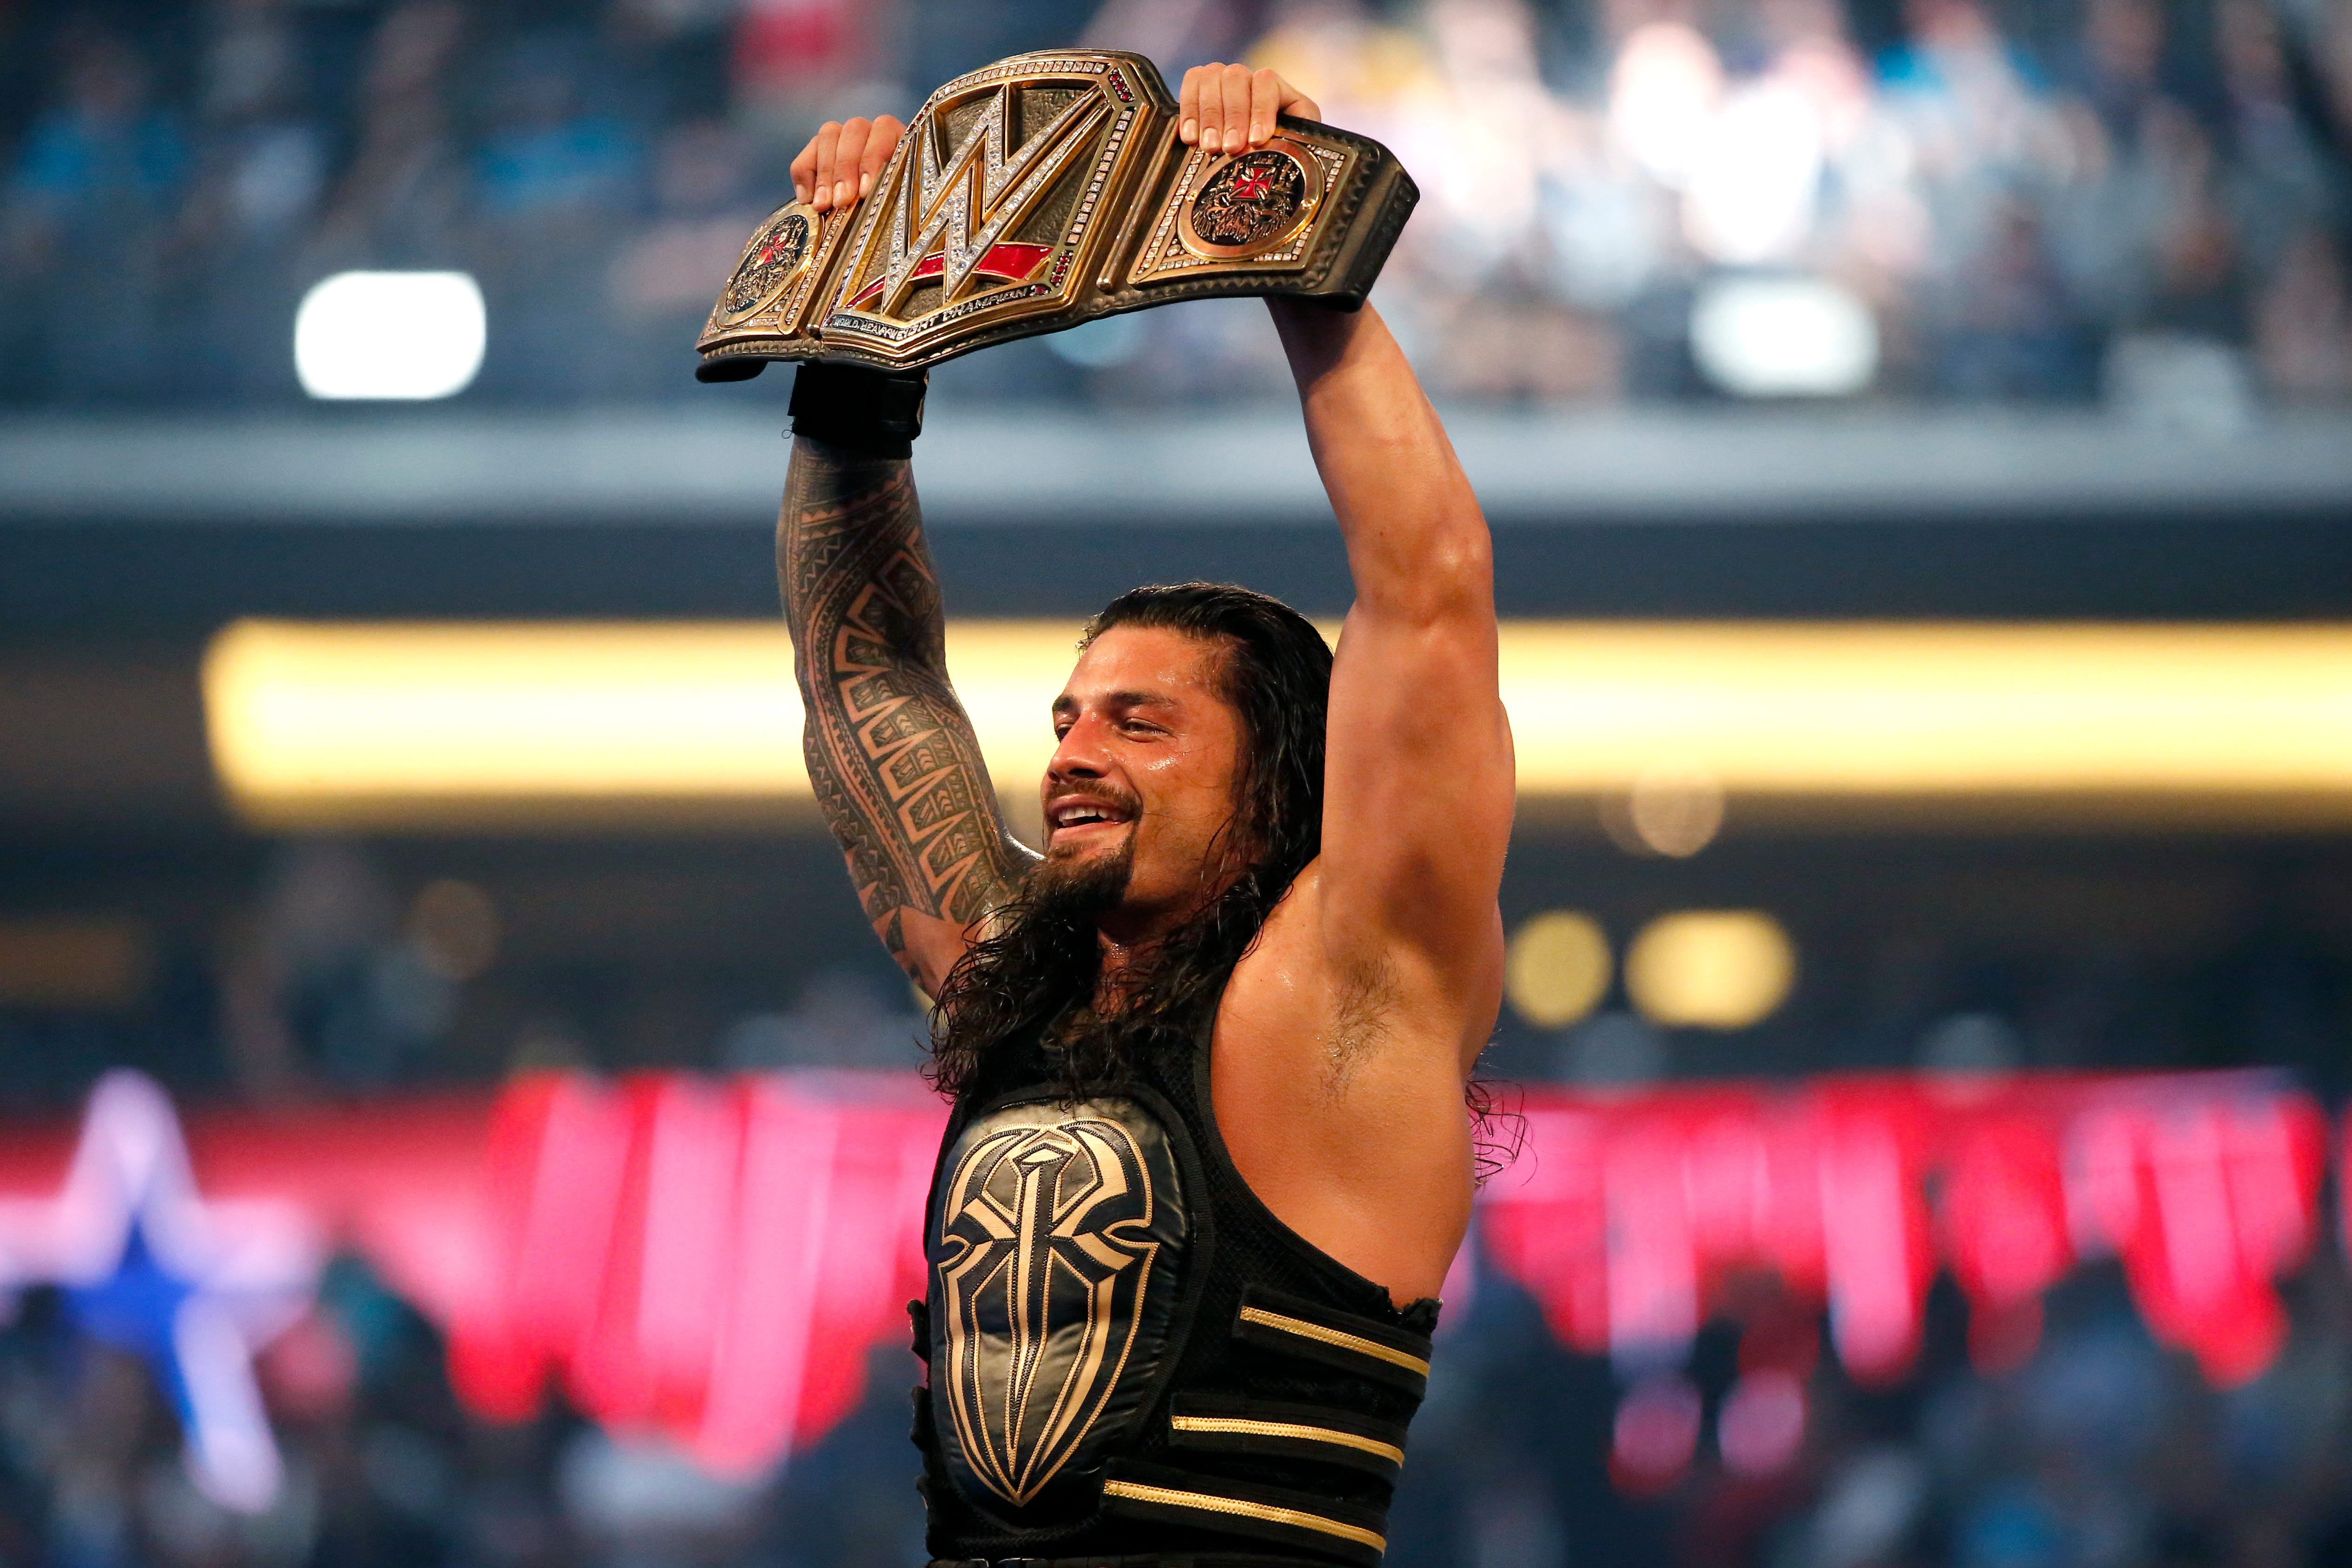 Roman Reigns Announces On Wwe Raw His Leukemia Is In Remission